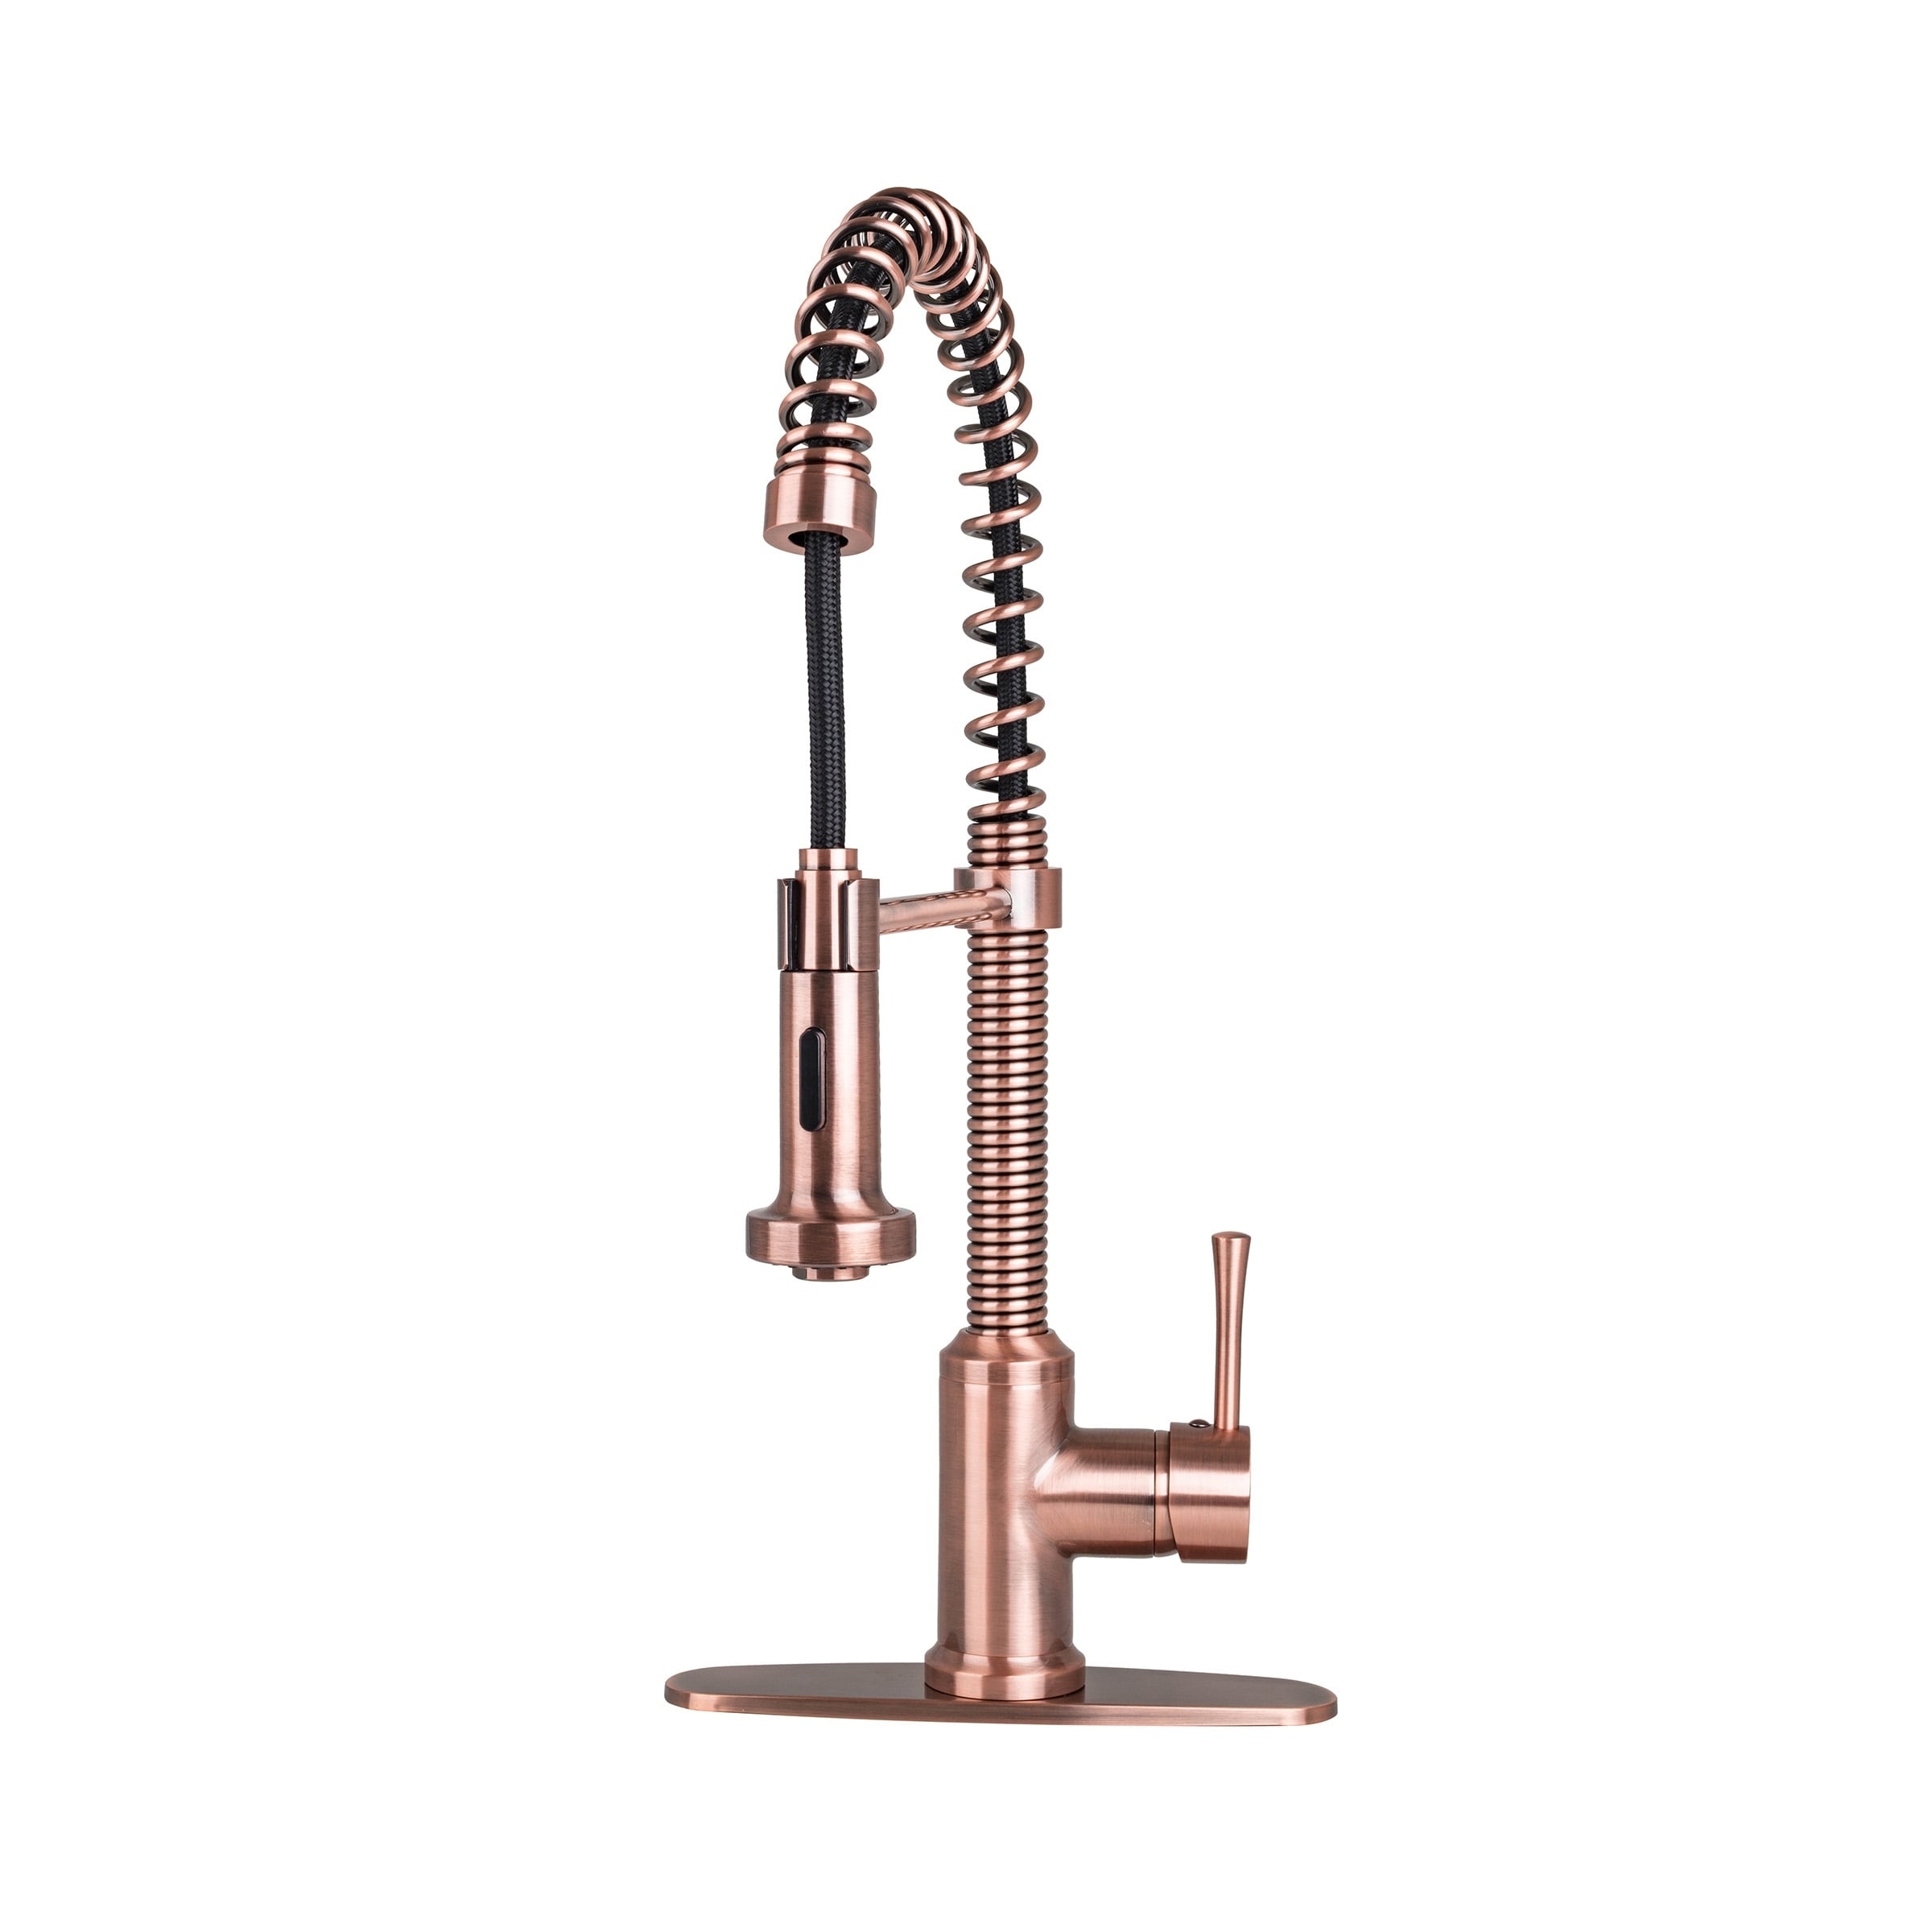 Brienza By Italia Spring Pull Down Kitchen Faucet Antique Copper On Sale Overstock 21139246